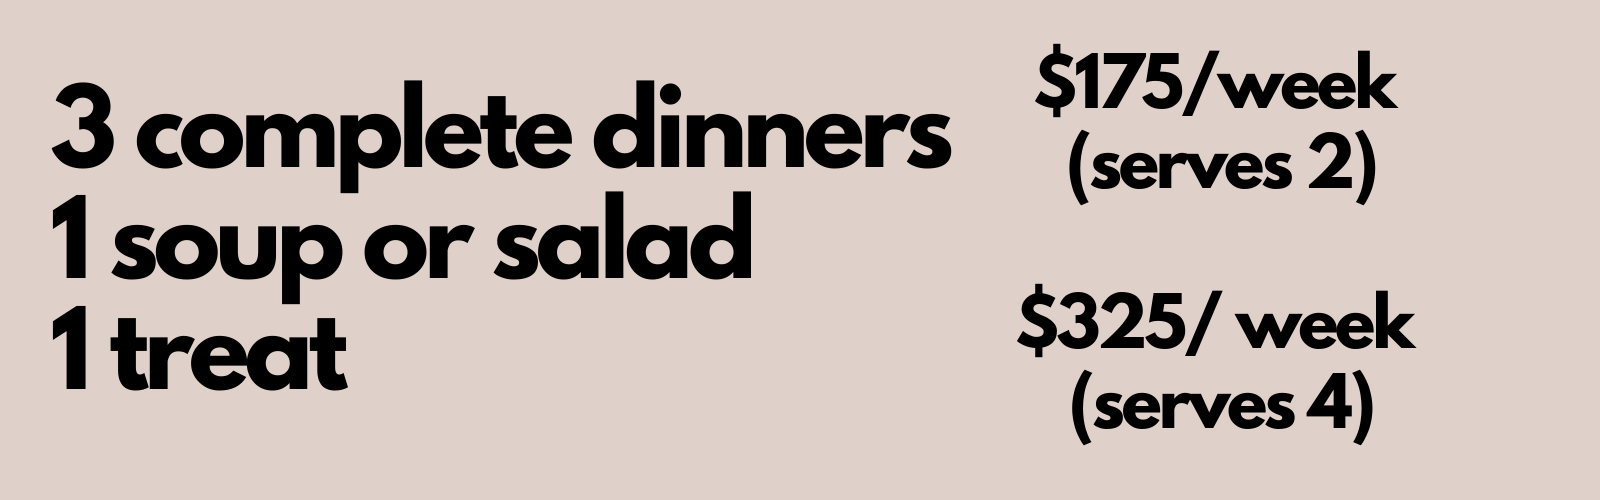 Black bold text on muted pink background that says "3 complete dinners, 1 soup or salad, 1 treat. $175/week (serves 2) $325/week (serves 4)"